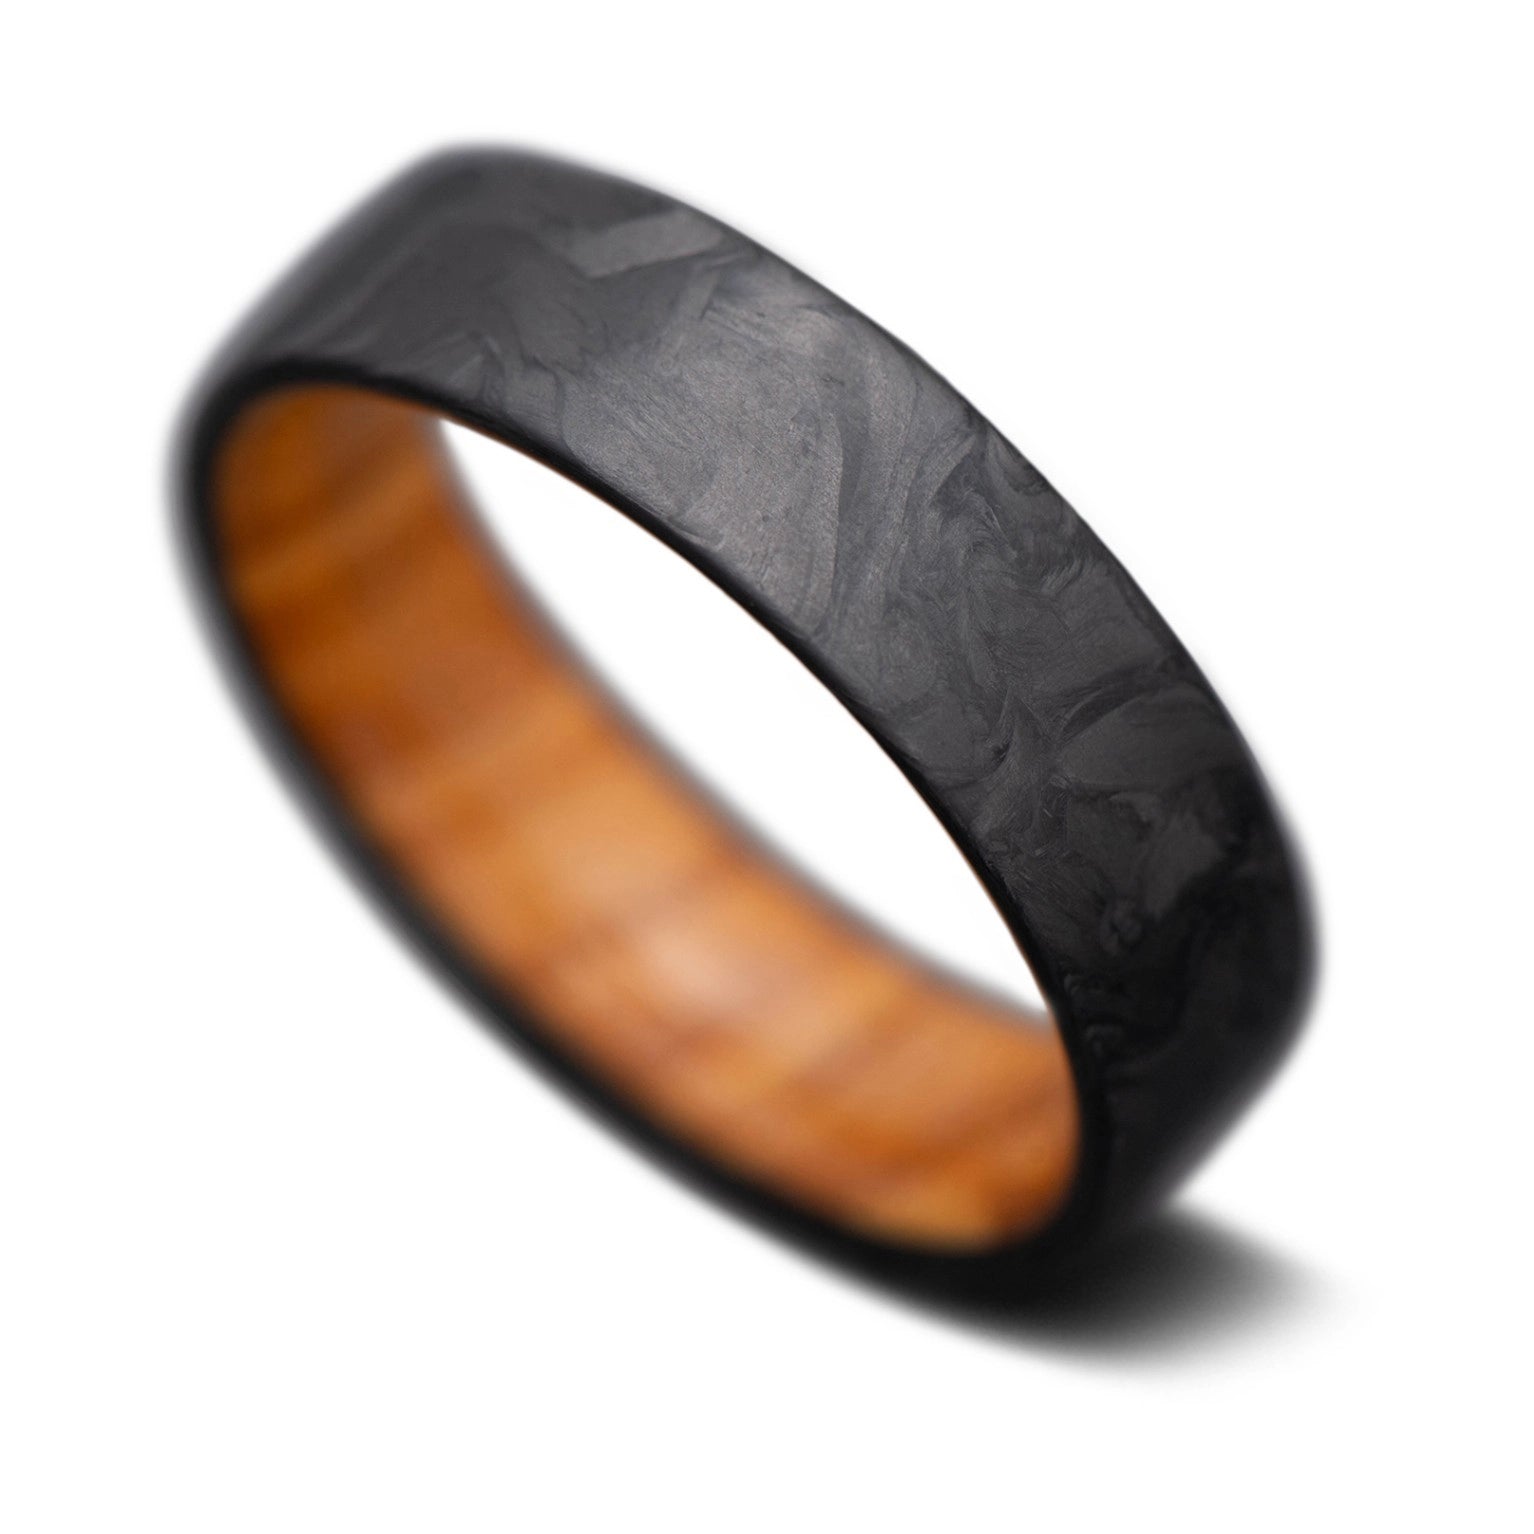 CarbonForged Core Ring with Olivewood inner sleeve, 7mm -THE QUEST